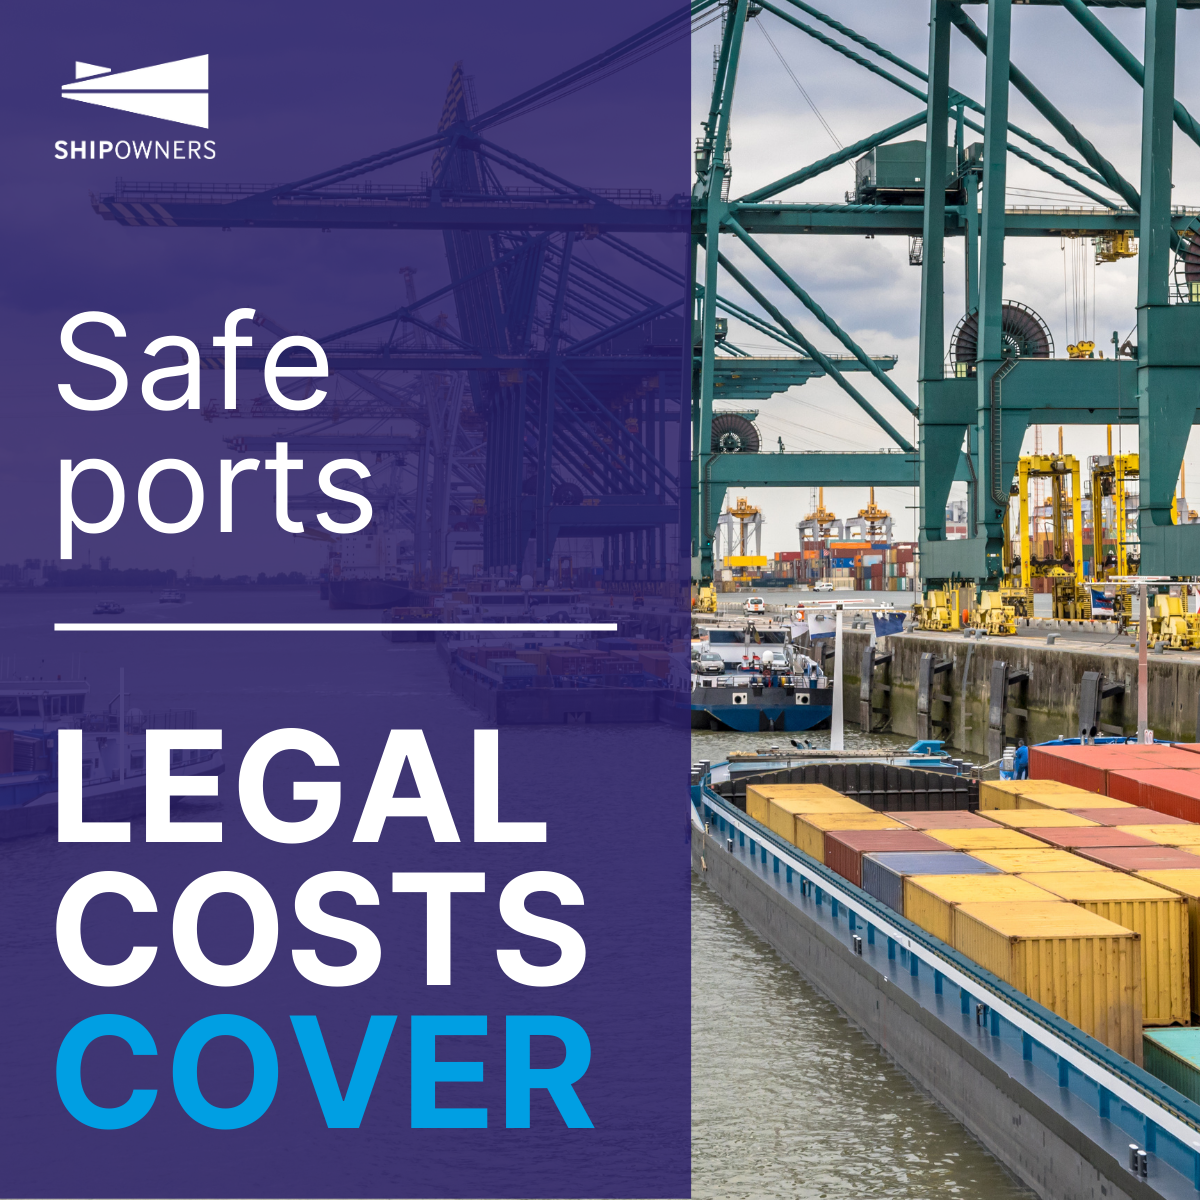 LEGAL COSTS COVER safe ports.png